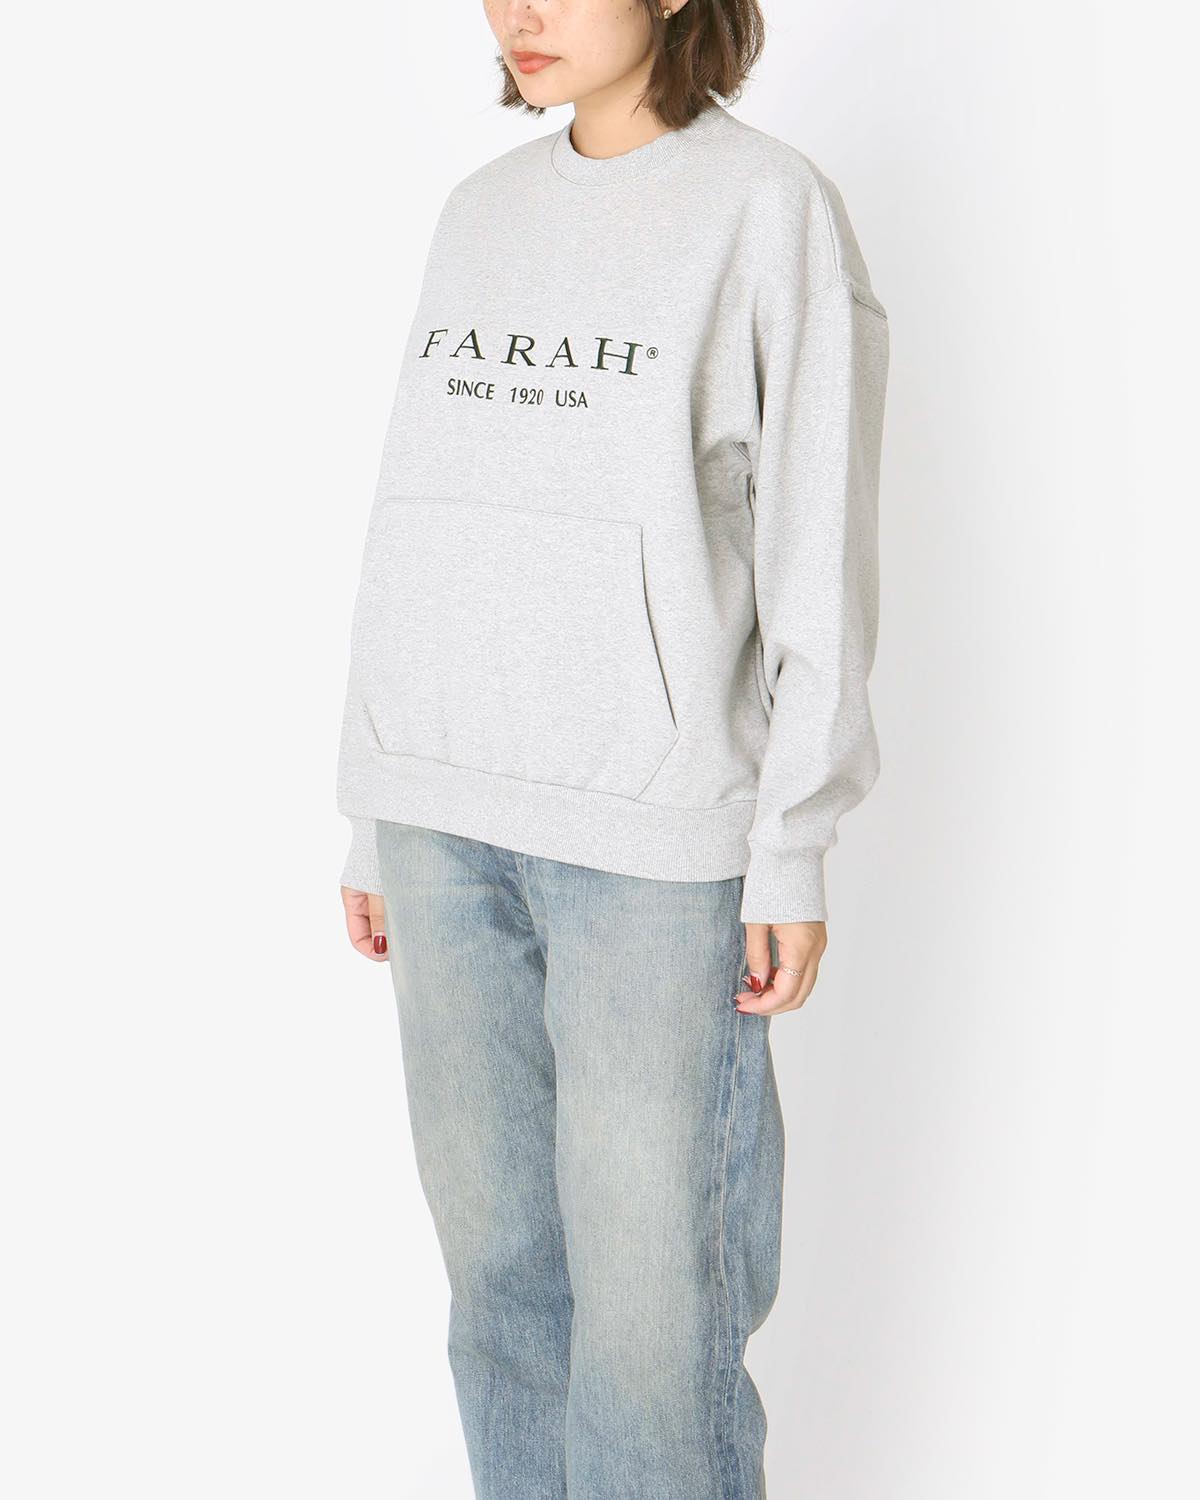 EMBROIDERED LOGO SWEATSHIRT for COVERCHORD